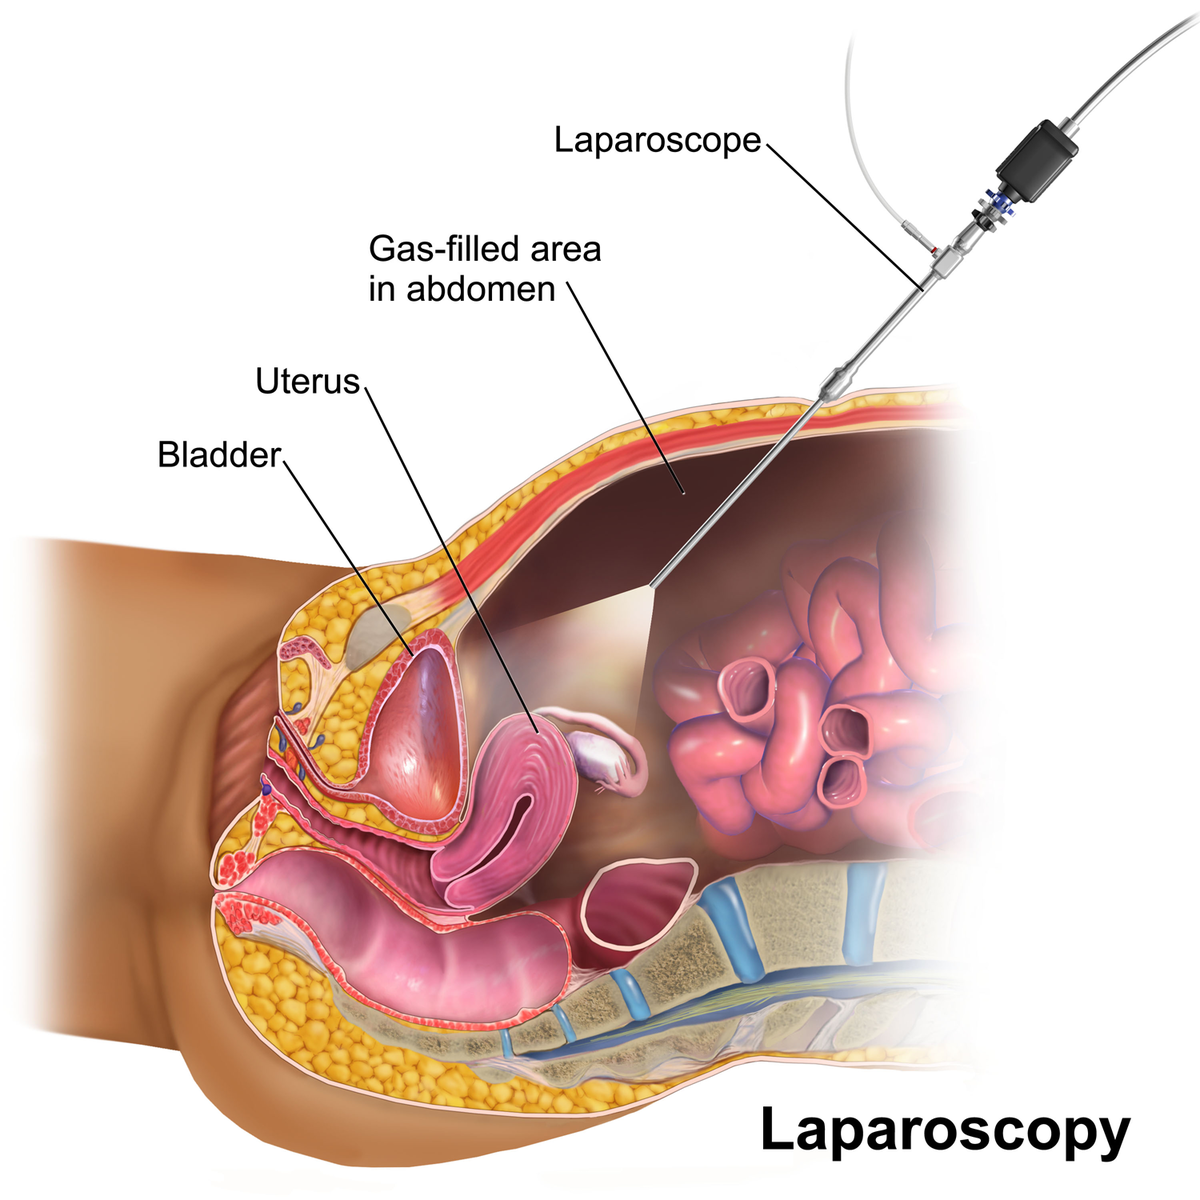 Best Laparoscopic colon cancer surgery Hospital in Hyderabad, Bariatric surgery doctor near me